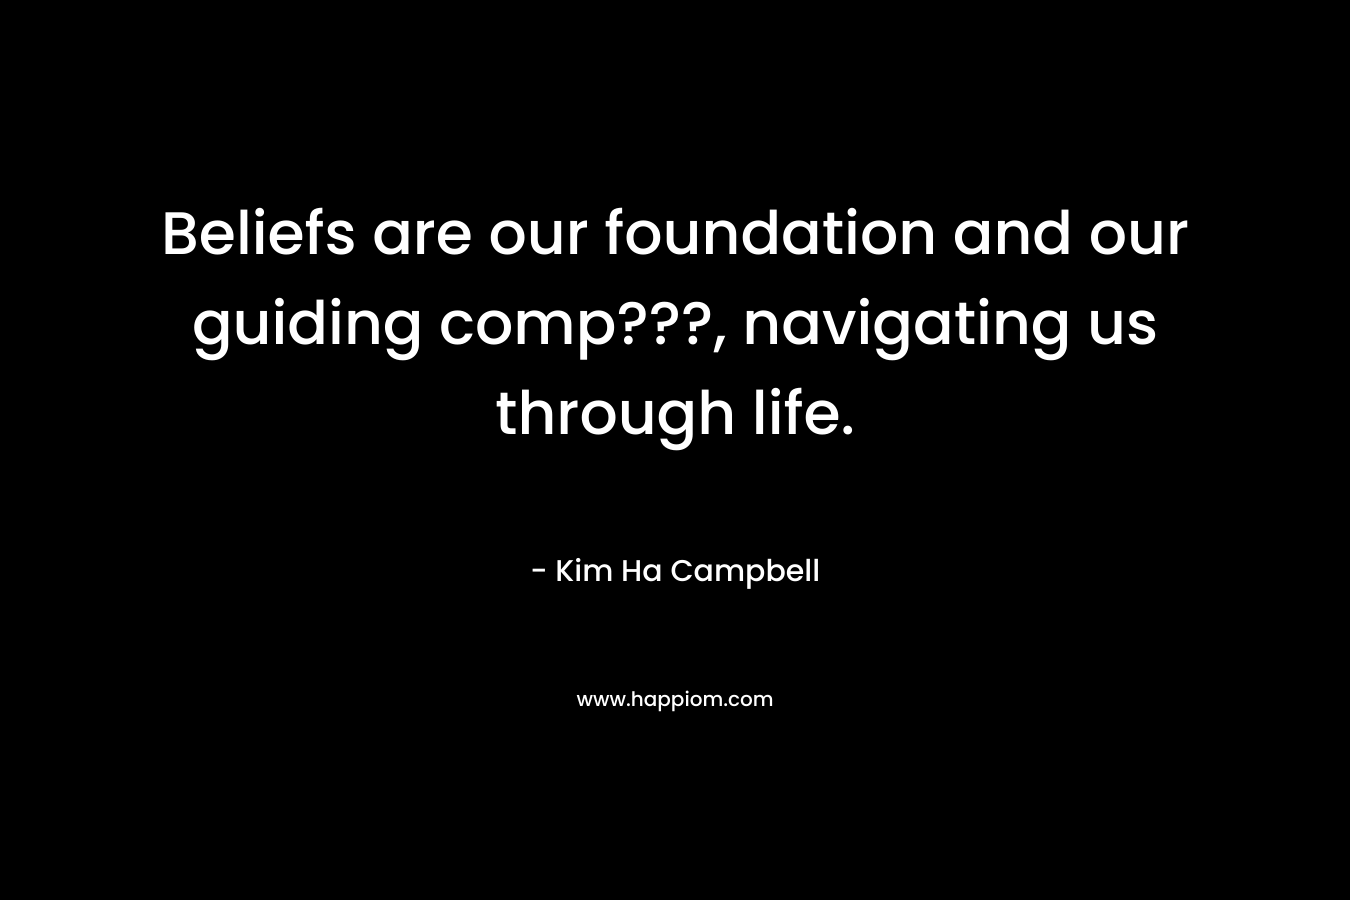 Beliefs are our foundation and our guiding comp???, navigating us through life. – Kim Ha Campbell